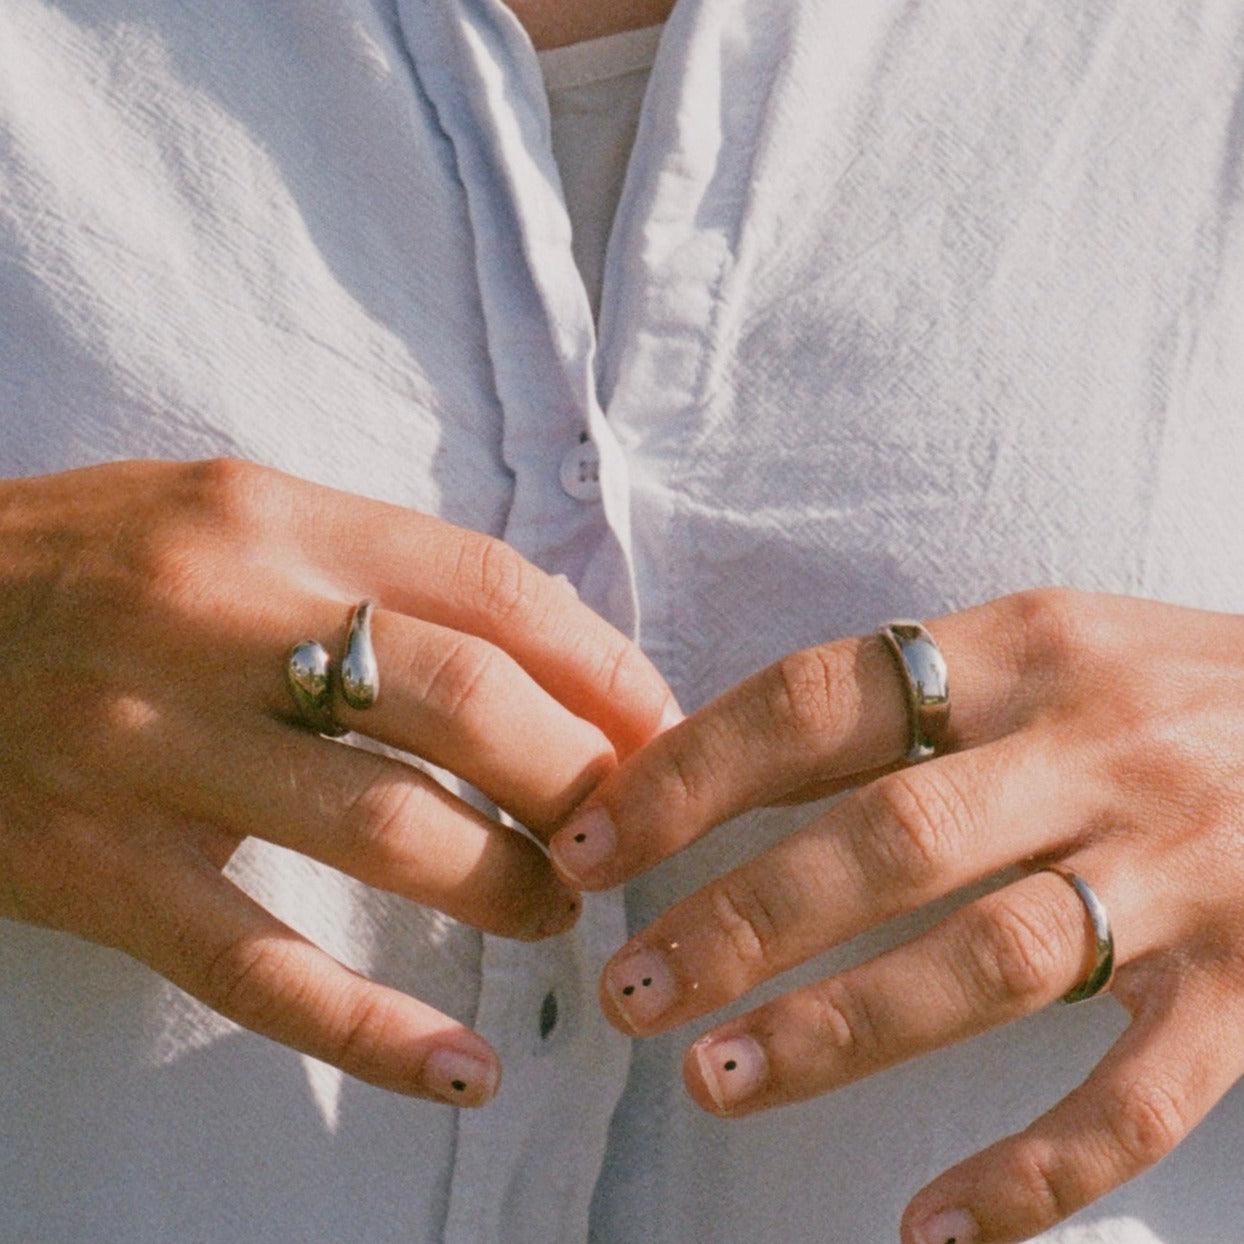 Dome ring, Sustainable jewelry